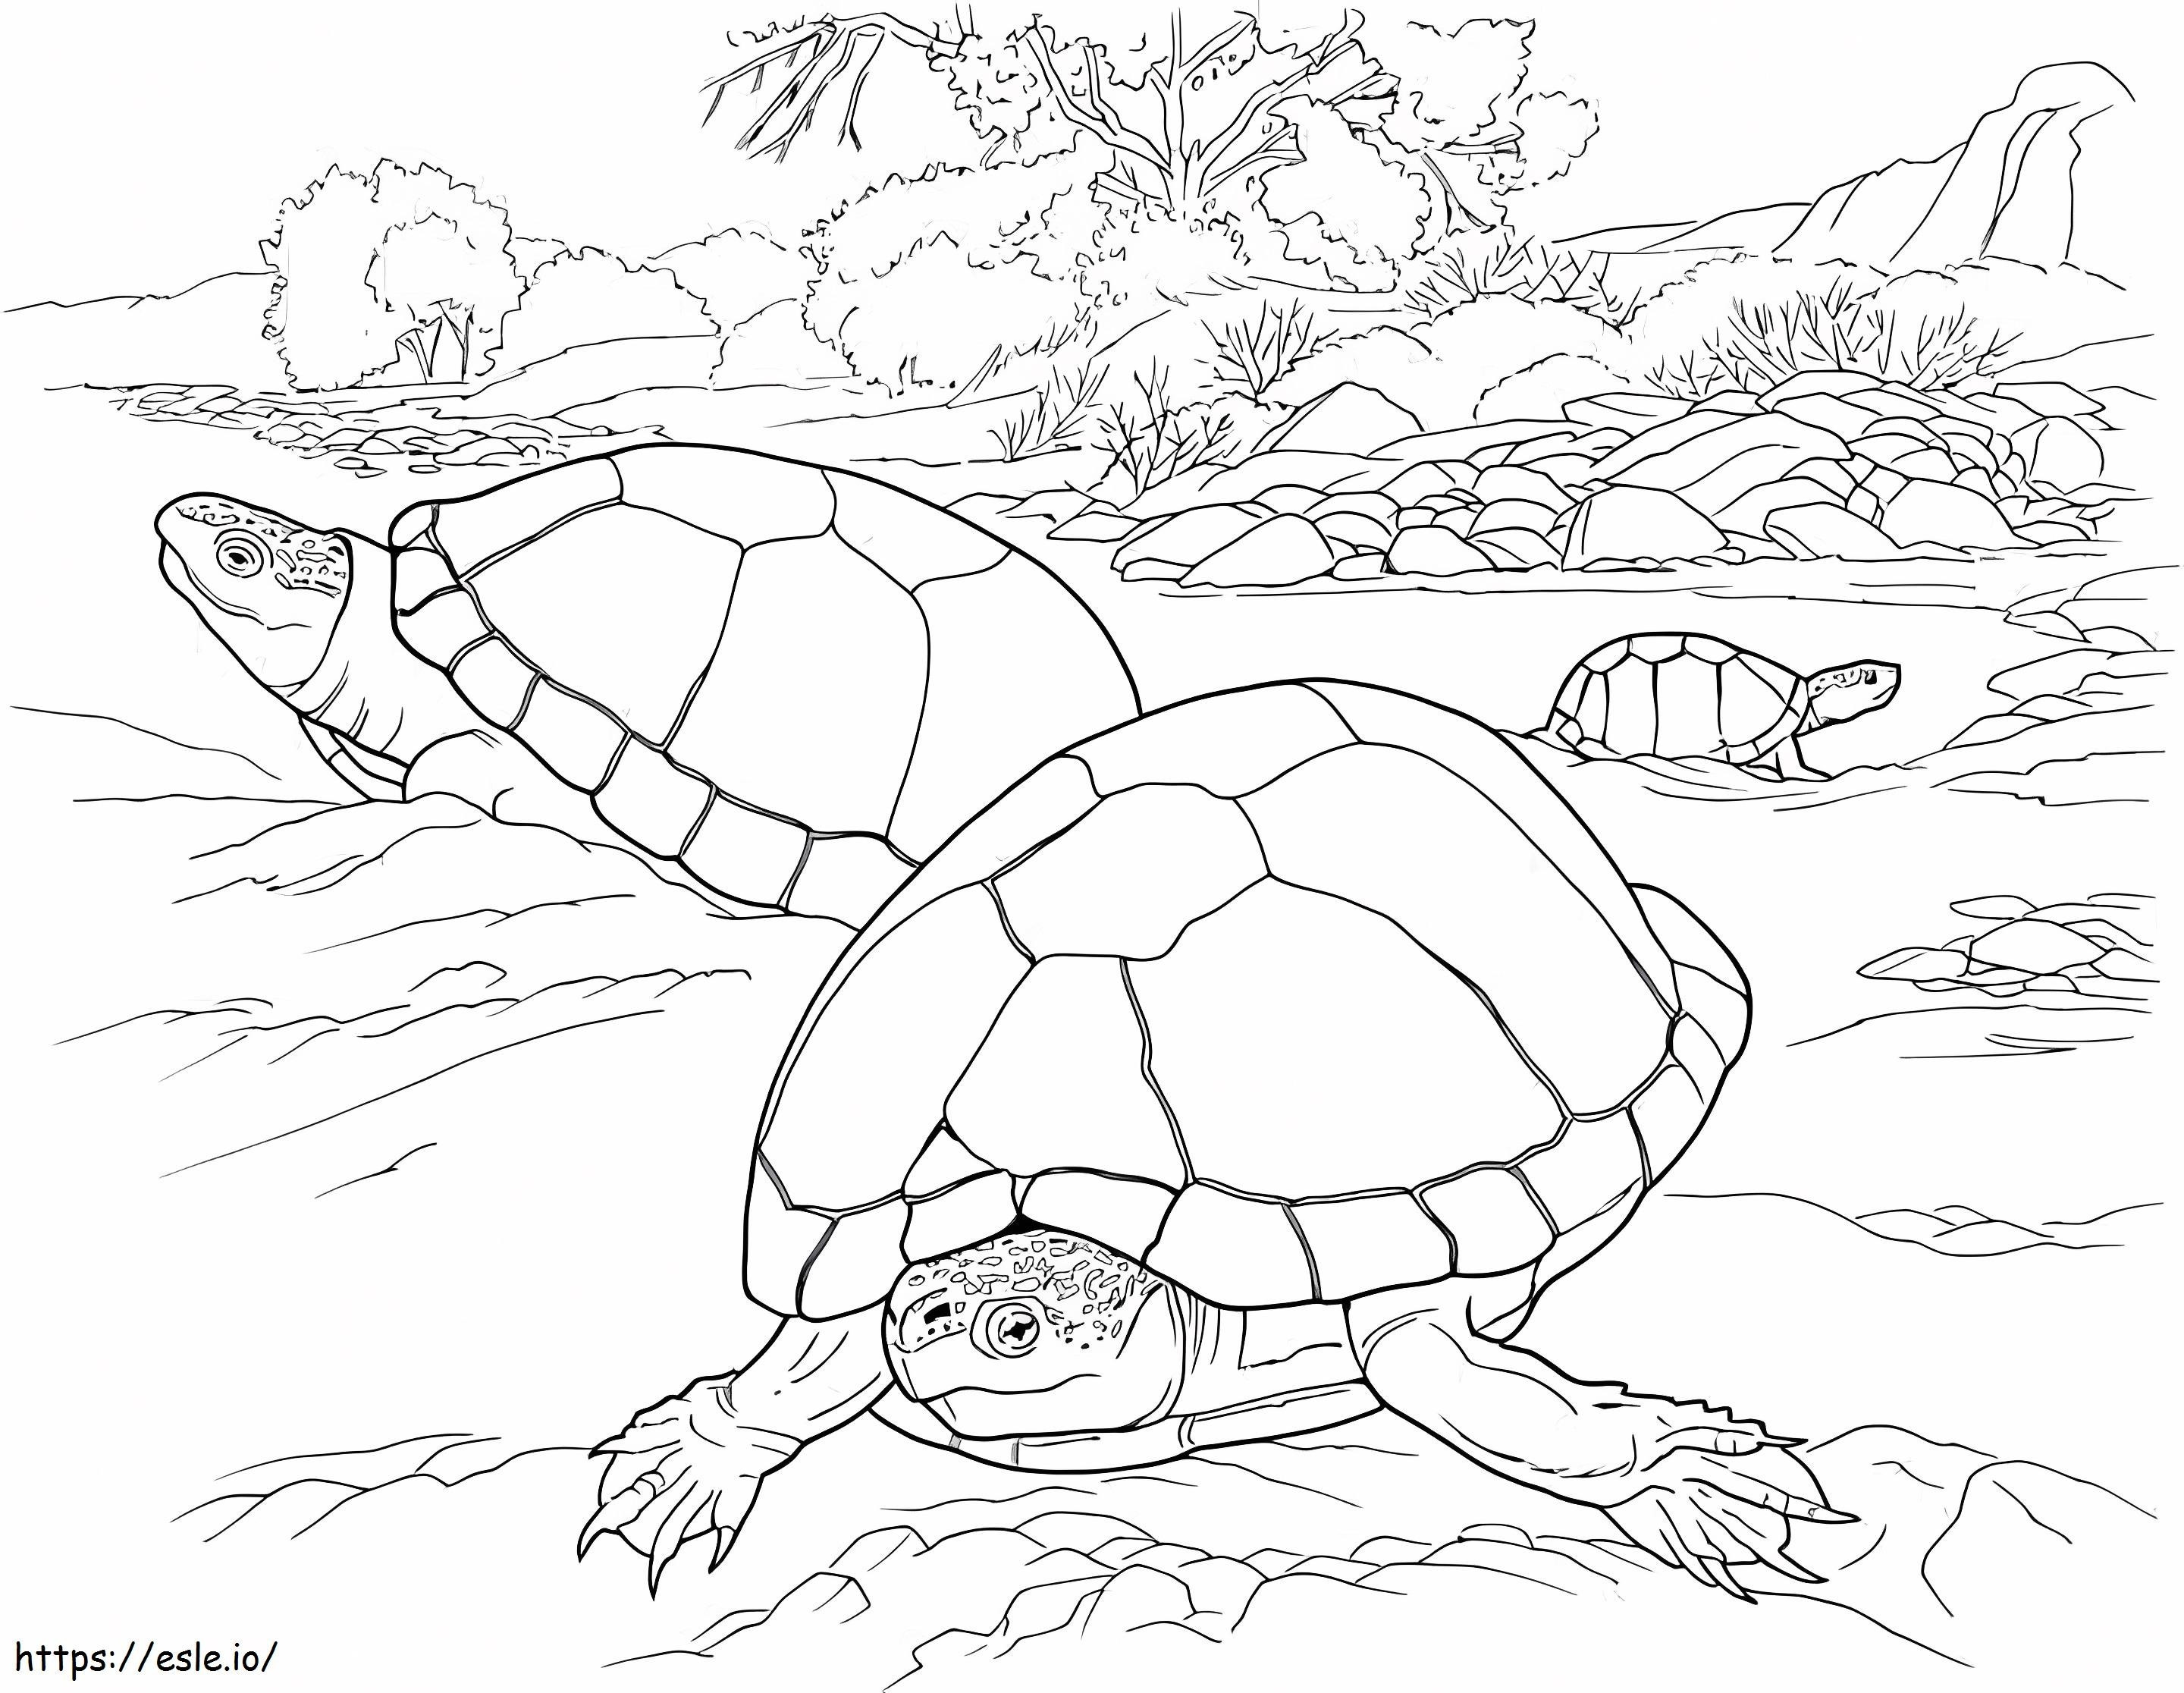 Turtles In The Desert coloring page